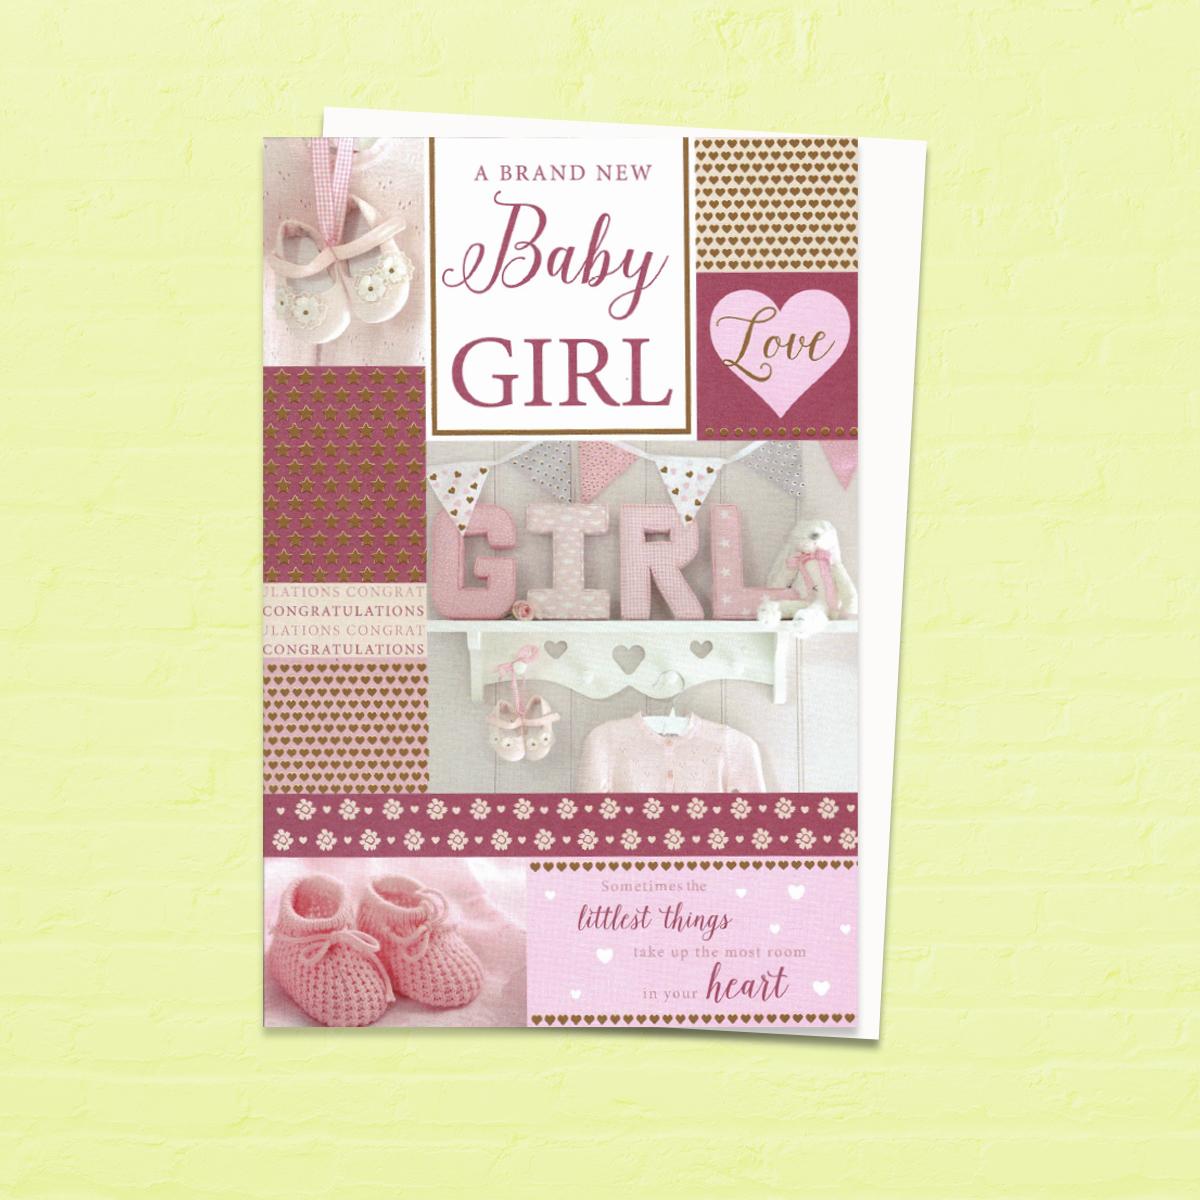 'A Brand New Baby Girl' Card With Bootees, Bunting And All Things Pink!